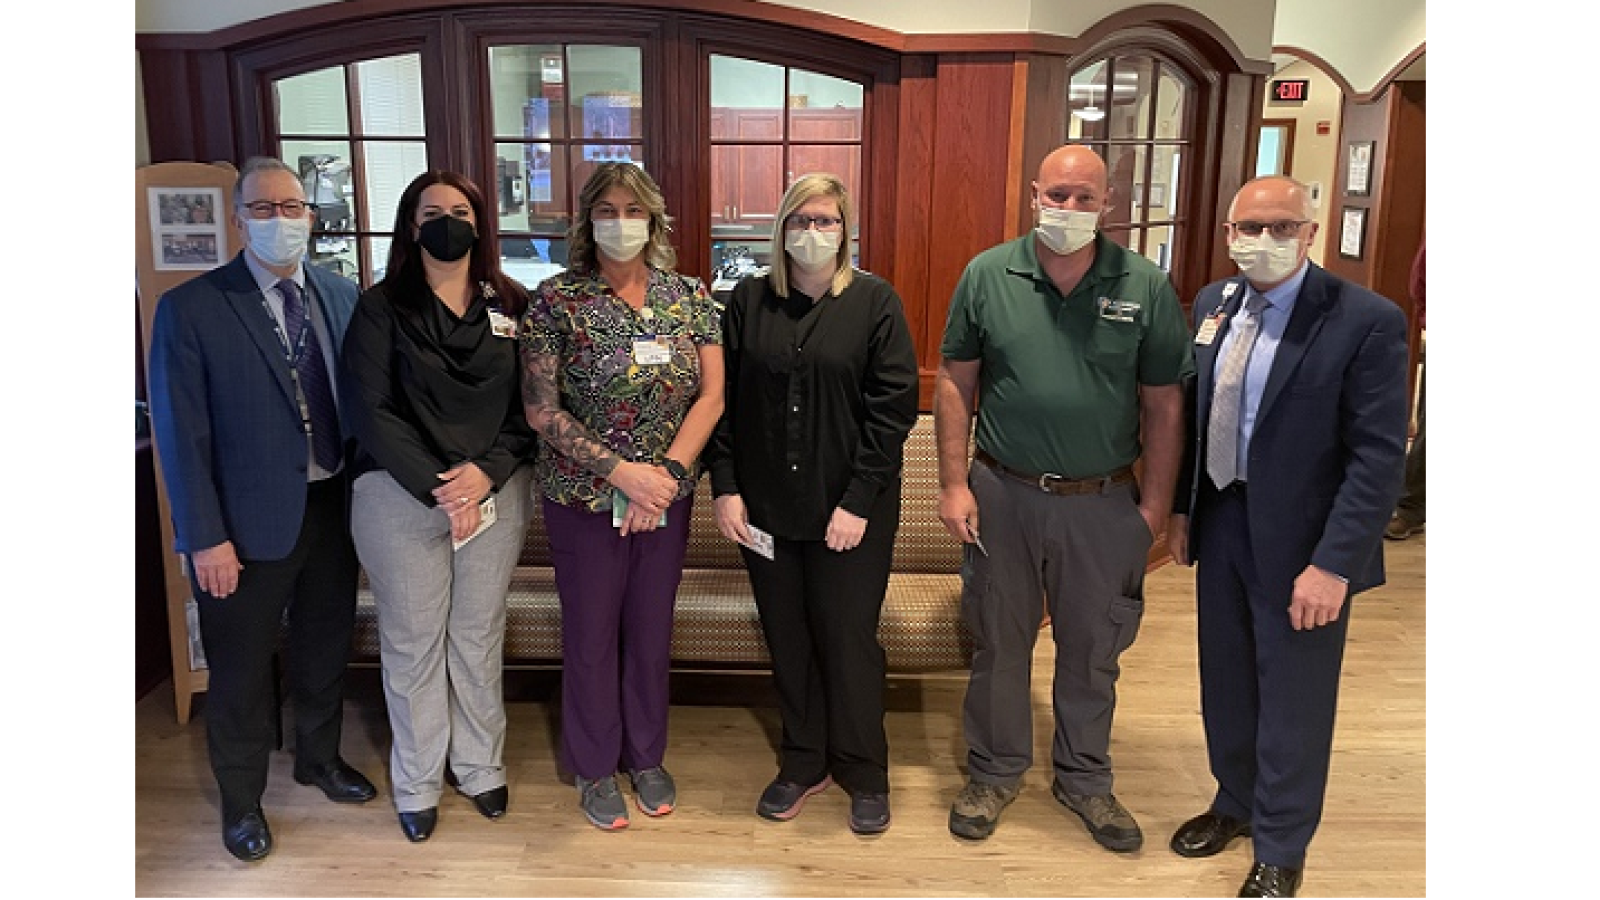 Pictured left to right: Dr. Ed Sabanegh, President and CEO, Guthrie, Jaimie Helmbright, Lisa Griffith, Kristin Brown, Brian Ackley, and Paul VerValin, Executive Vice President for Hospital and Ambulatory Services